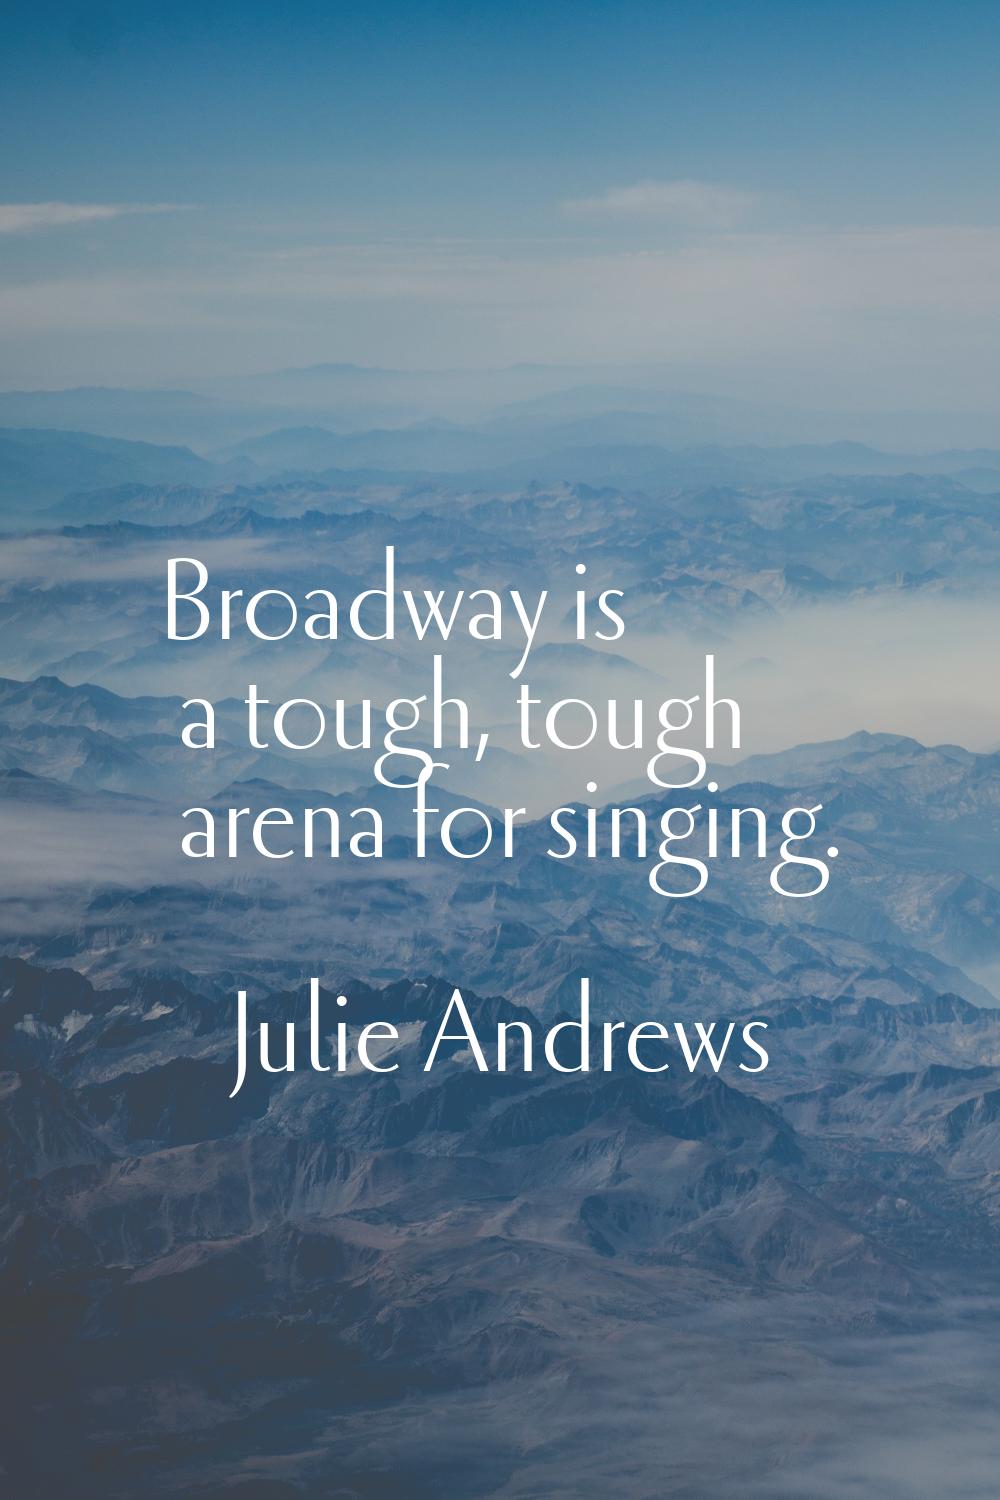 Broadway is a tough, tough arena for singing.